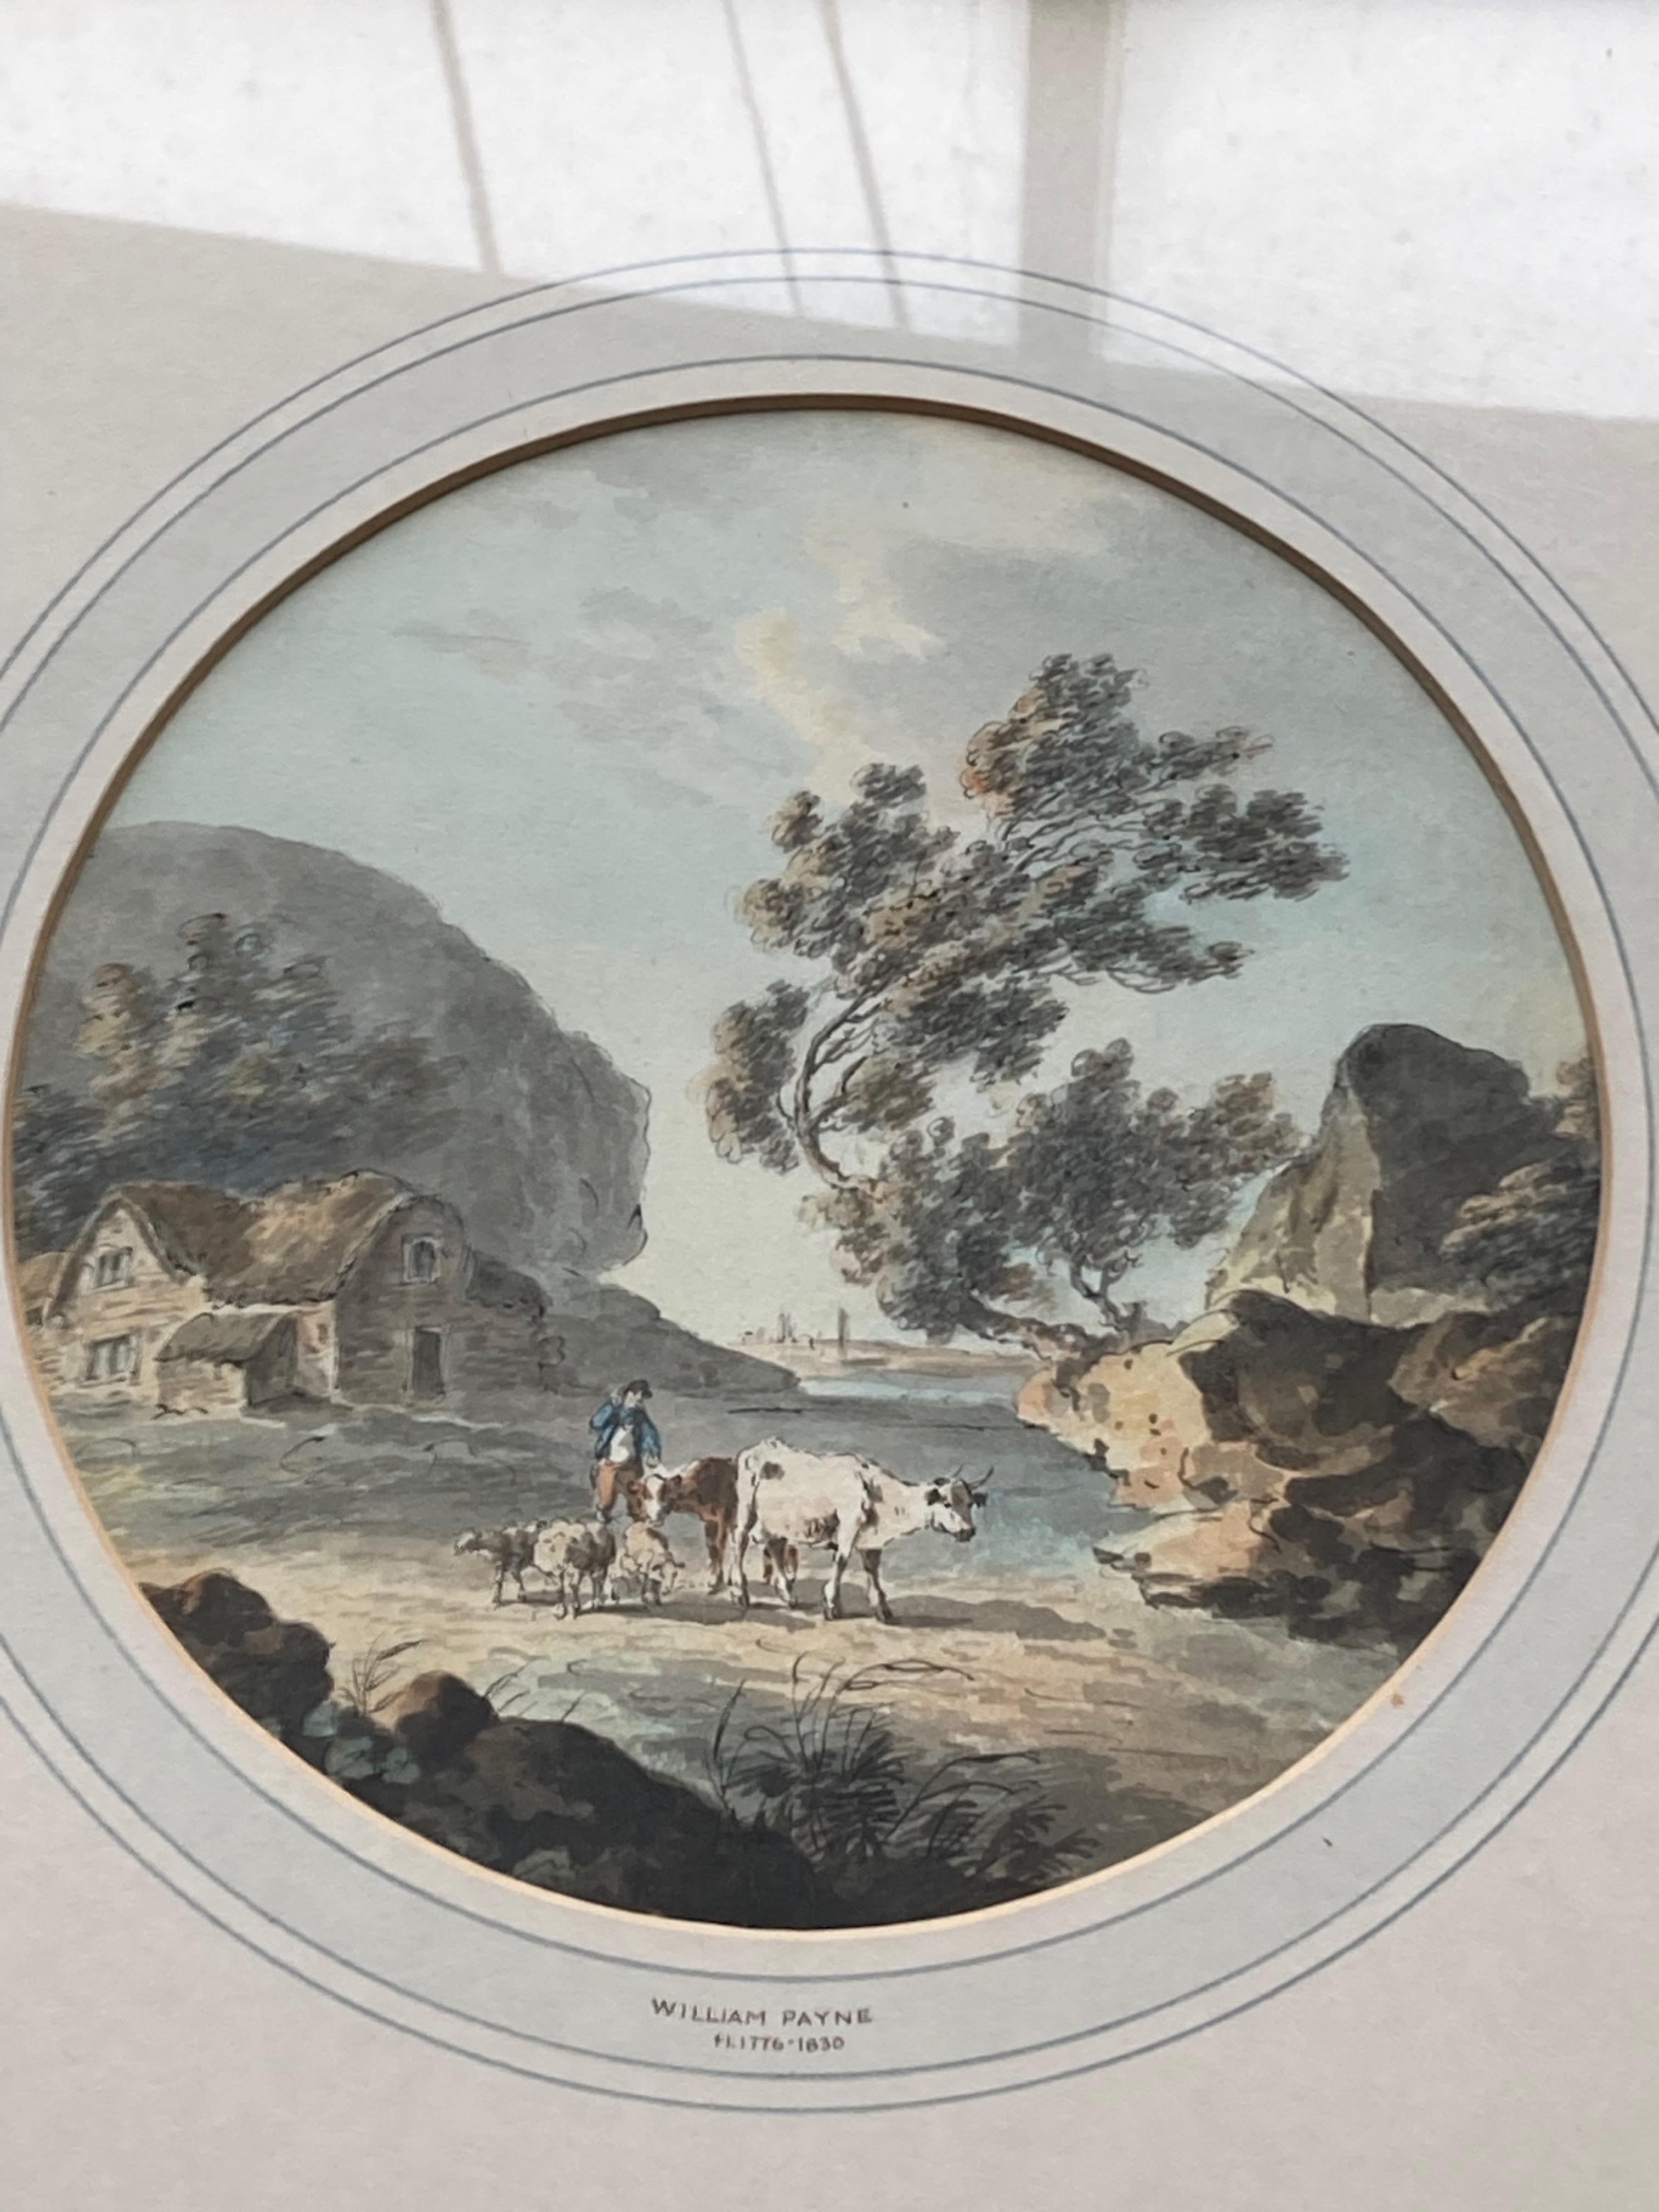 A delightful composition by this master watercolourist.

William Payne (1760-1830)
Figures and cattle by a river
Watercolour
7¾ inches, circular, unframed
15 x 14½ inches with the frame

Provenance: Leger Galleries, Old and Modern Masters, July